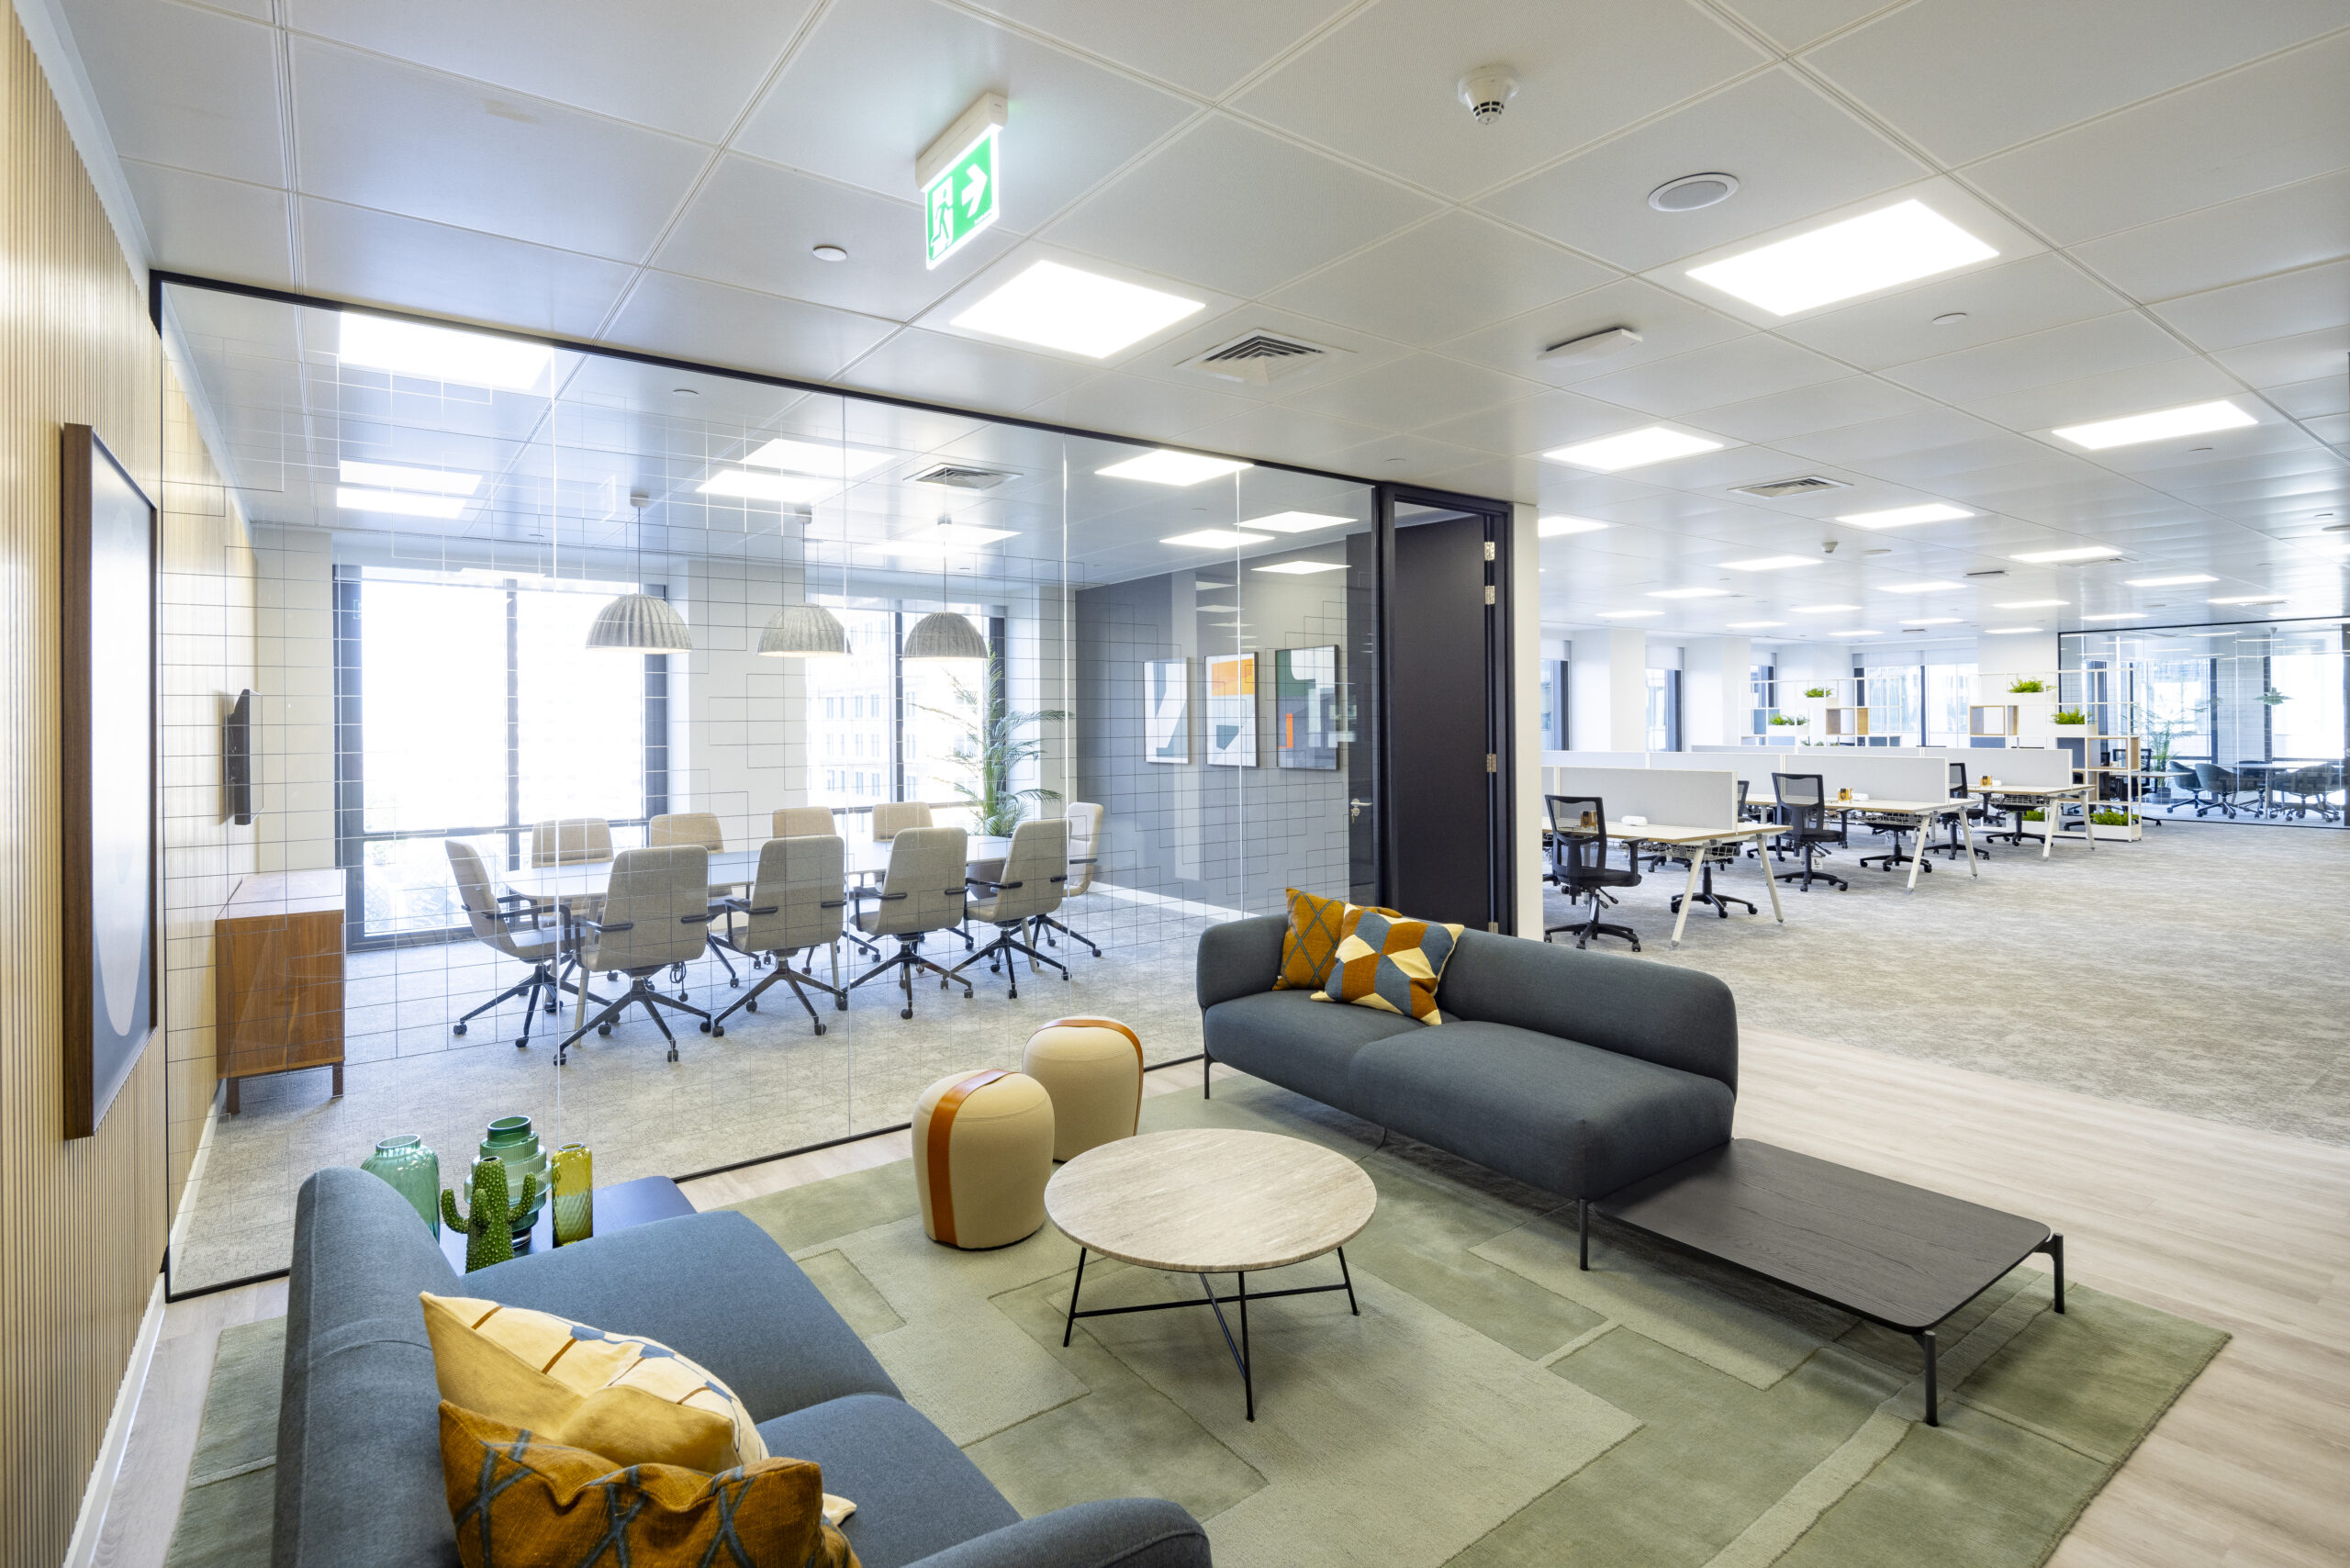 Canary Wharf Group welcomes new customers to MadeFor: its flexible, managed workspace